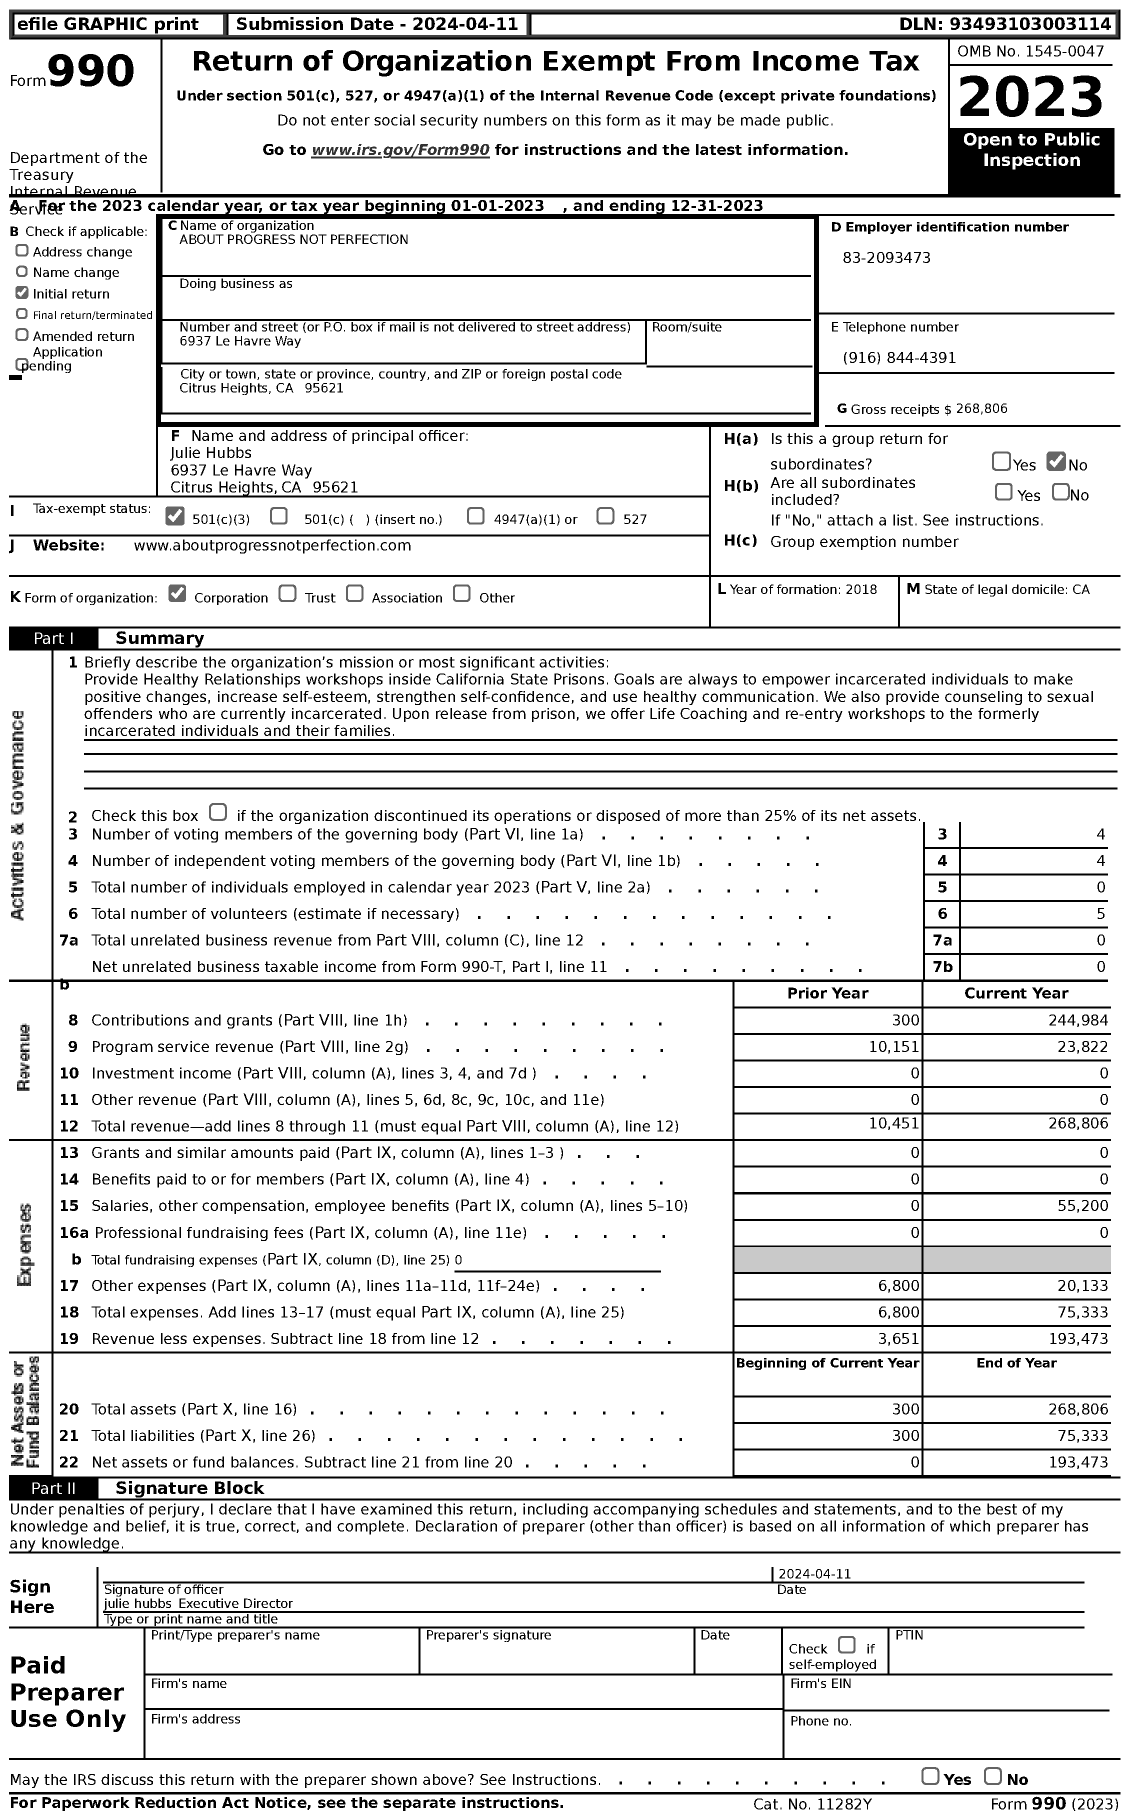 Image of first page of 2023 Form 990 for About Progress Not Perfection